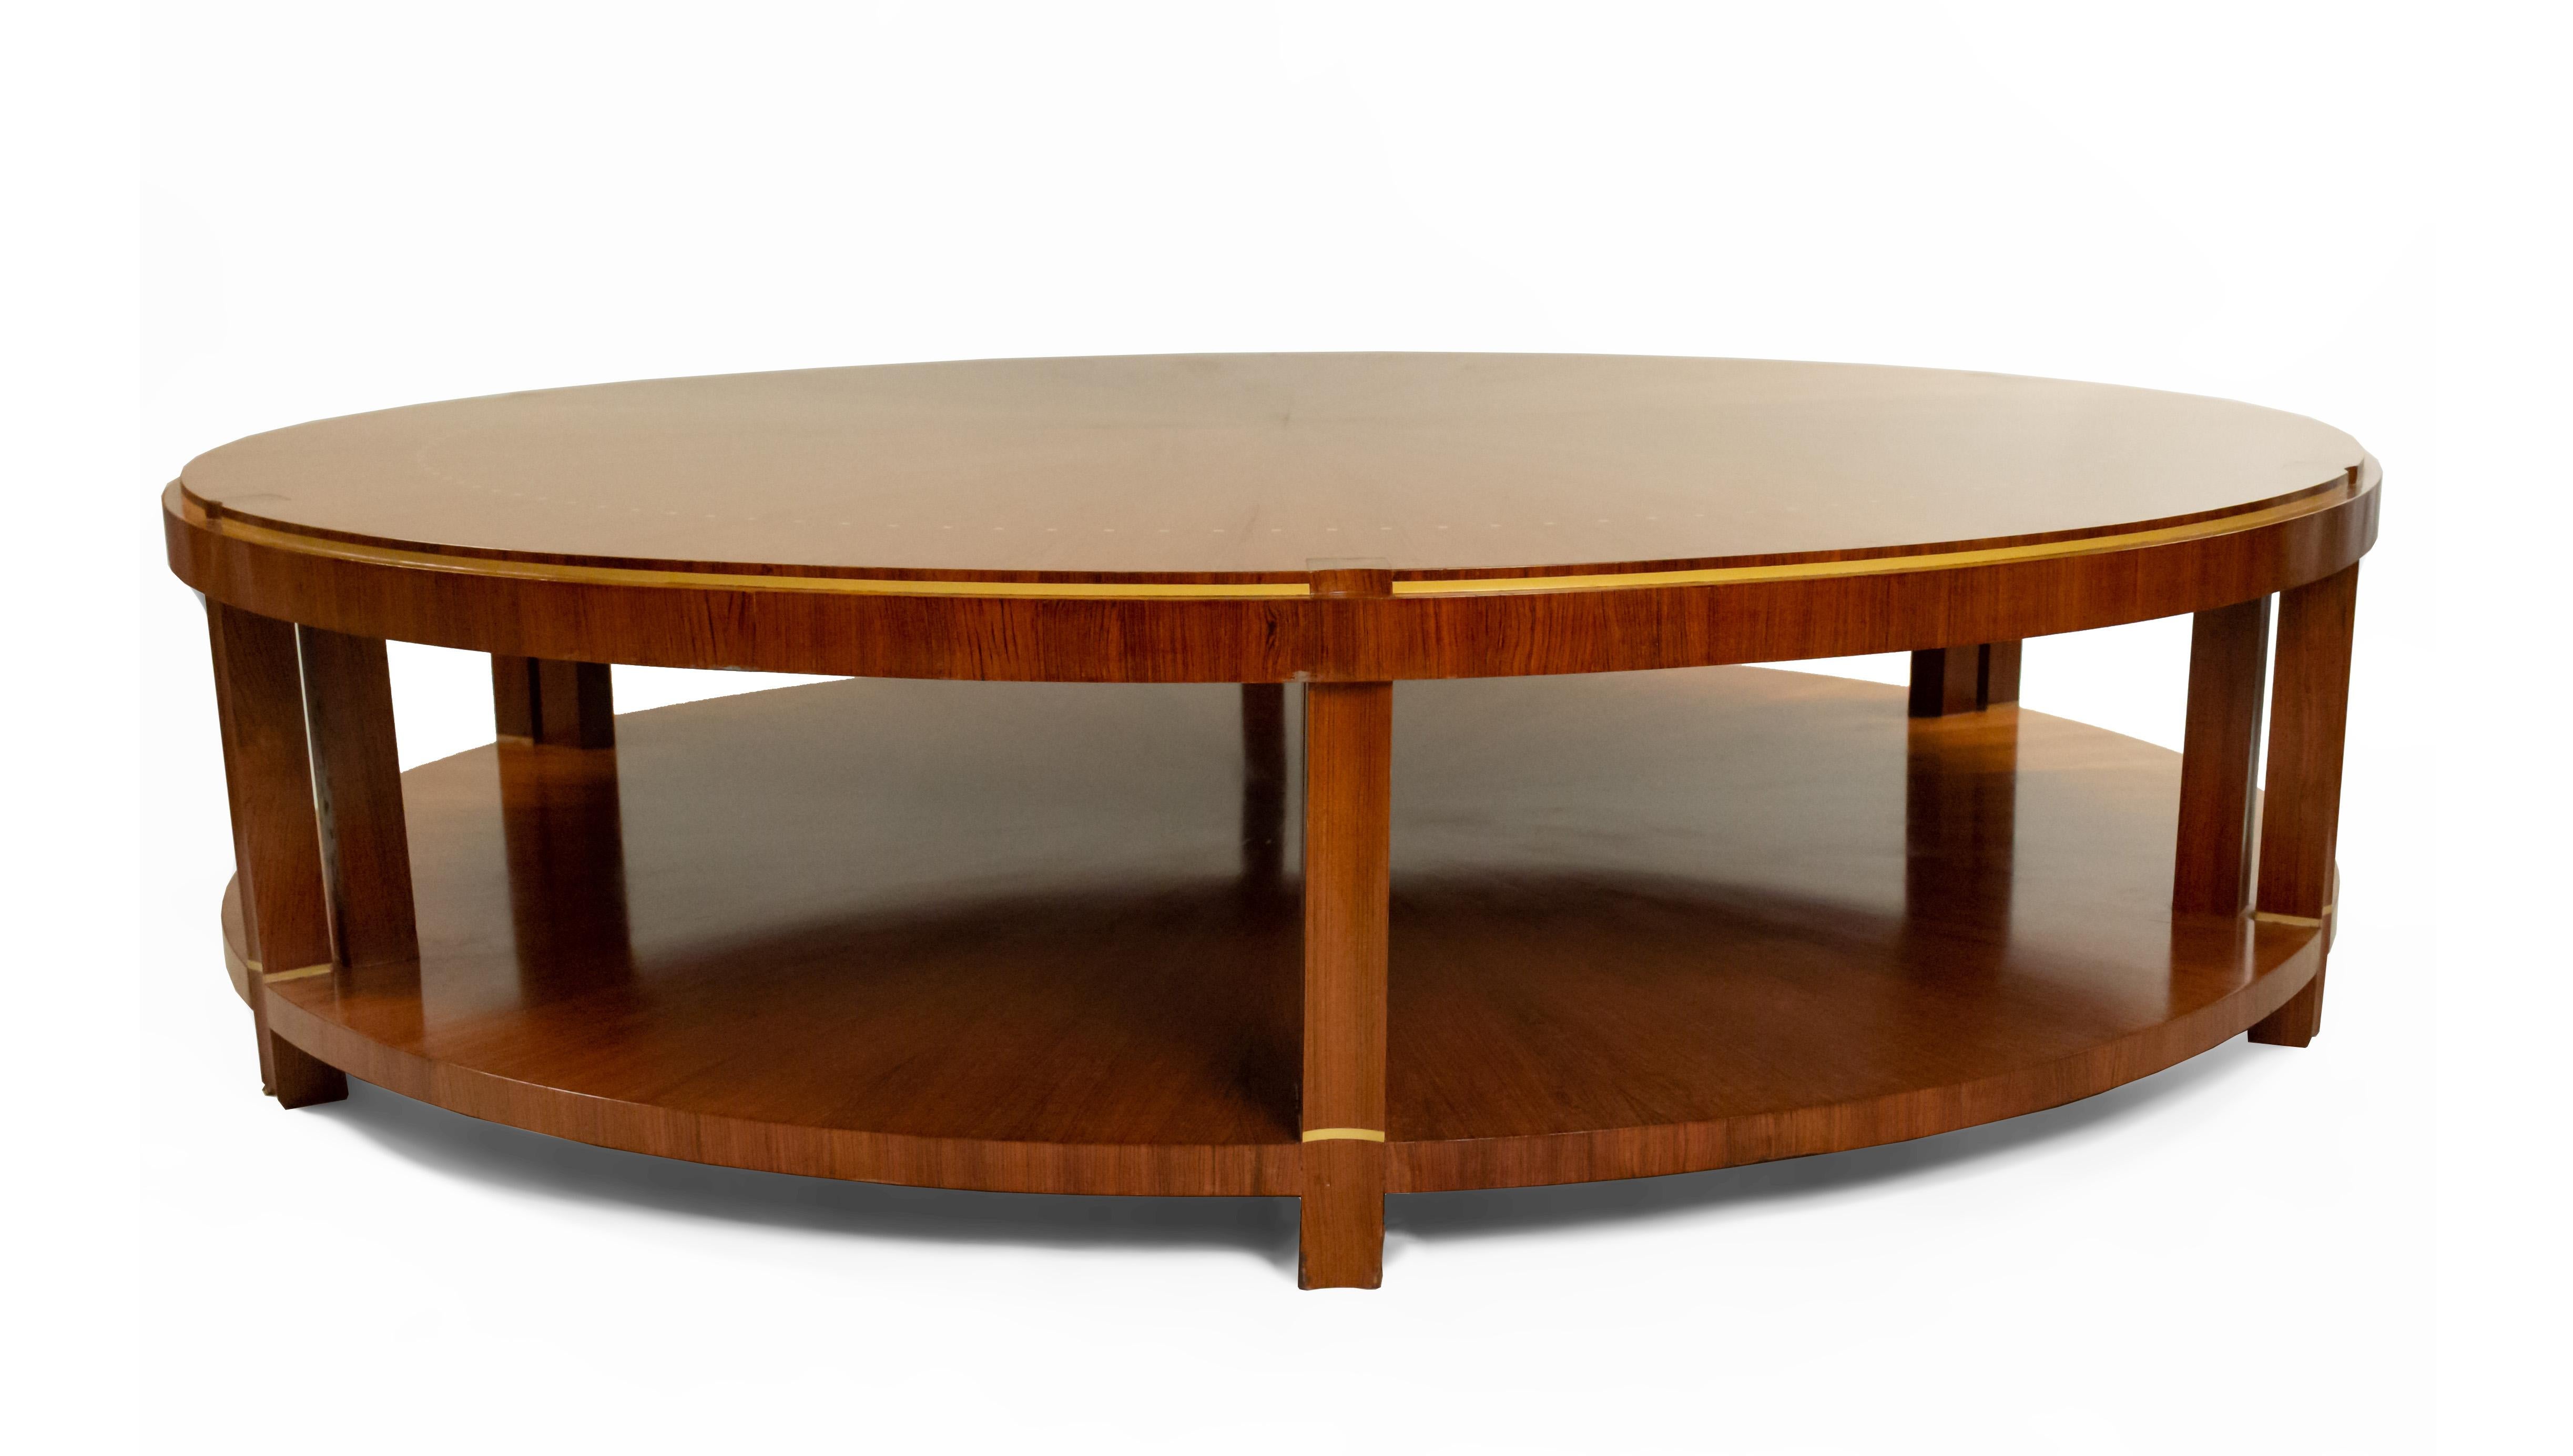 French Art Deco Round Rosewood Sunburst Coffee Table in the Manner of Ruhlmann 1